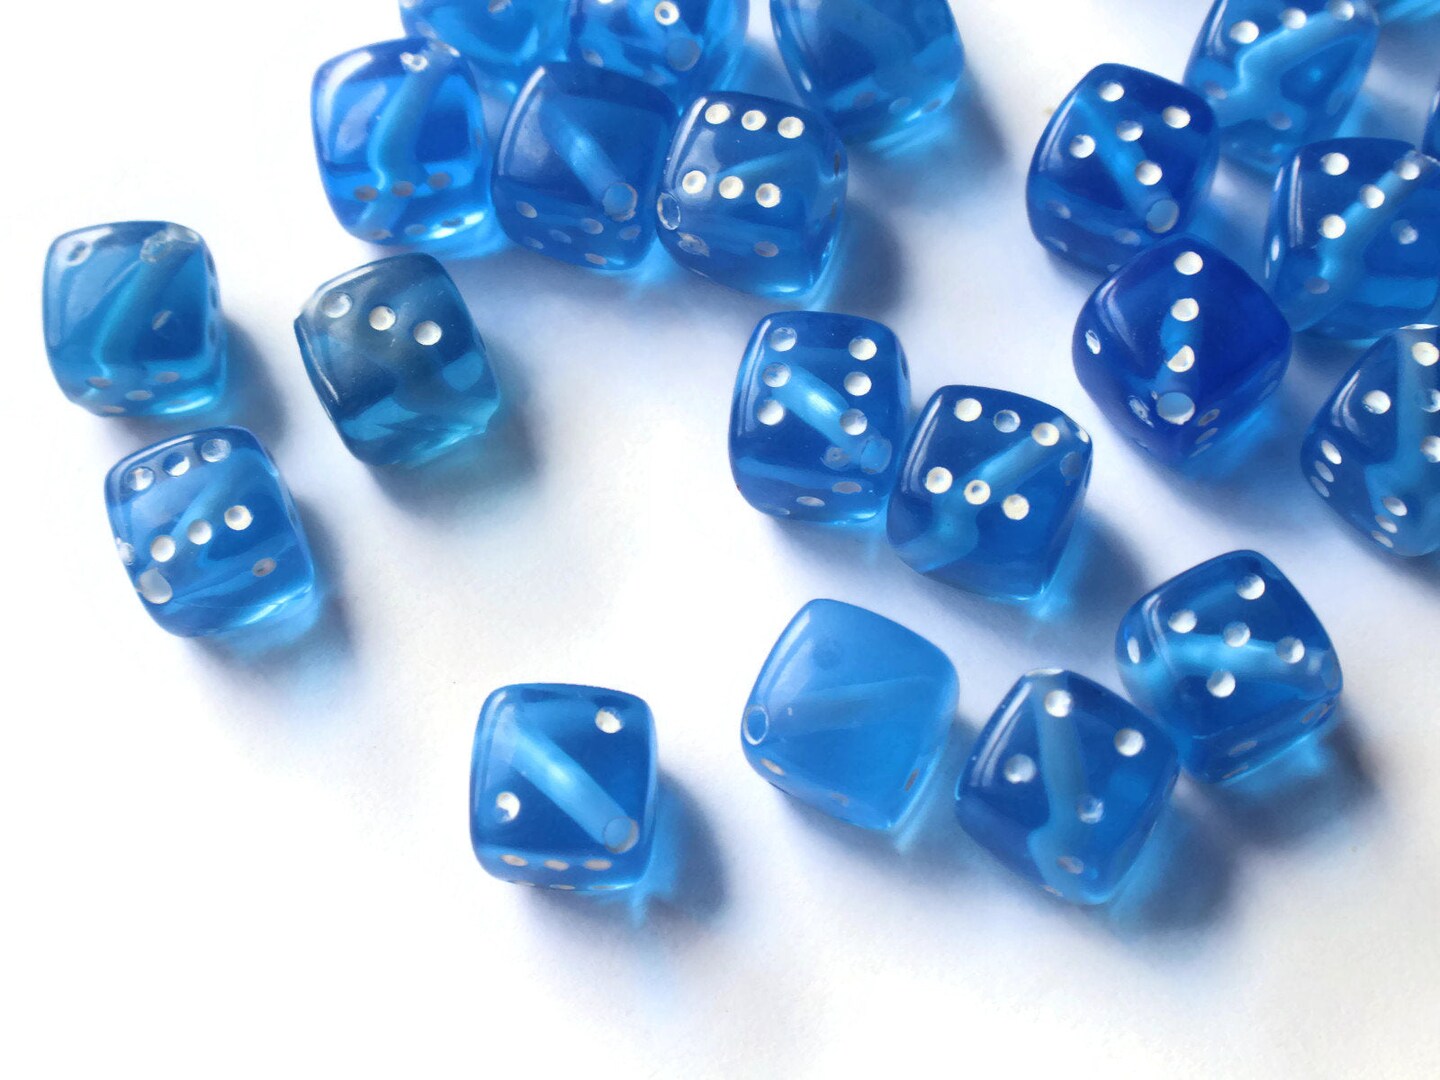 50 8mm Opaque Pale Turquoise Dice Plastic Cube Beads by Smileyboy Beads | Michaels